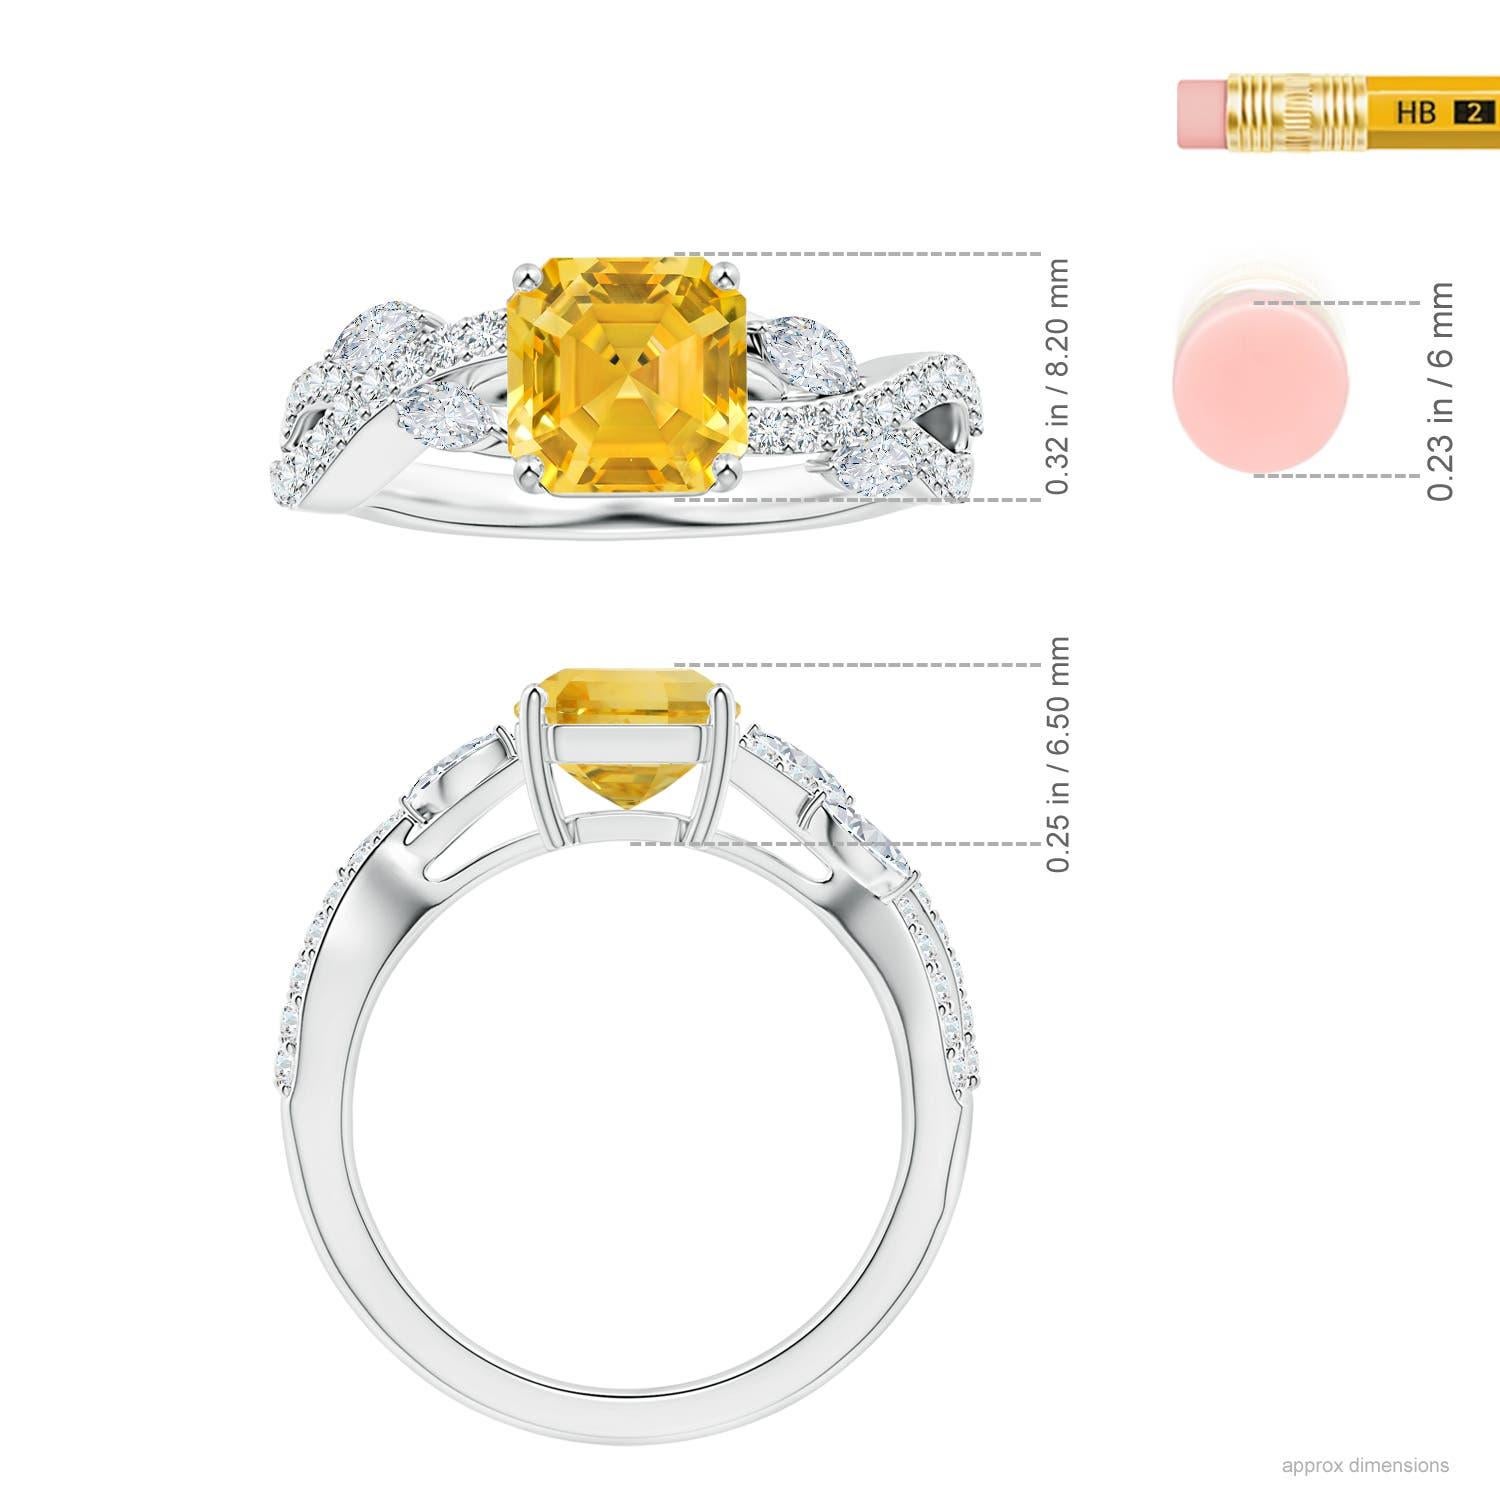 For Sale:  ANGARA GIA Certified Emerald-Cut Yellow Sapphire Ring in Platinum with Diamonds 5